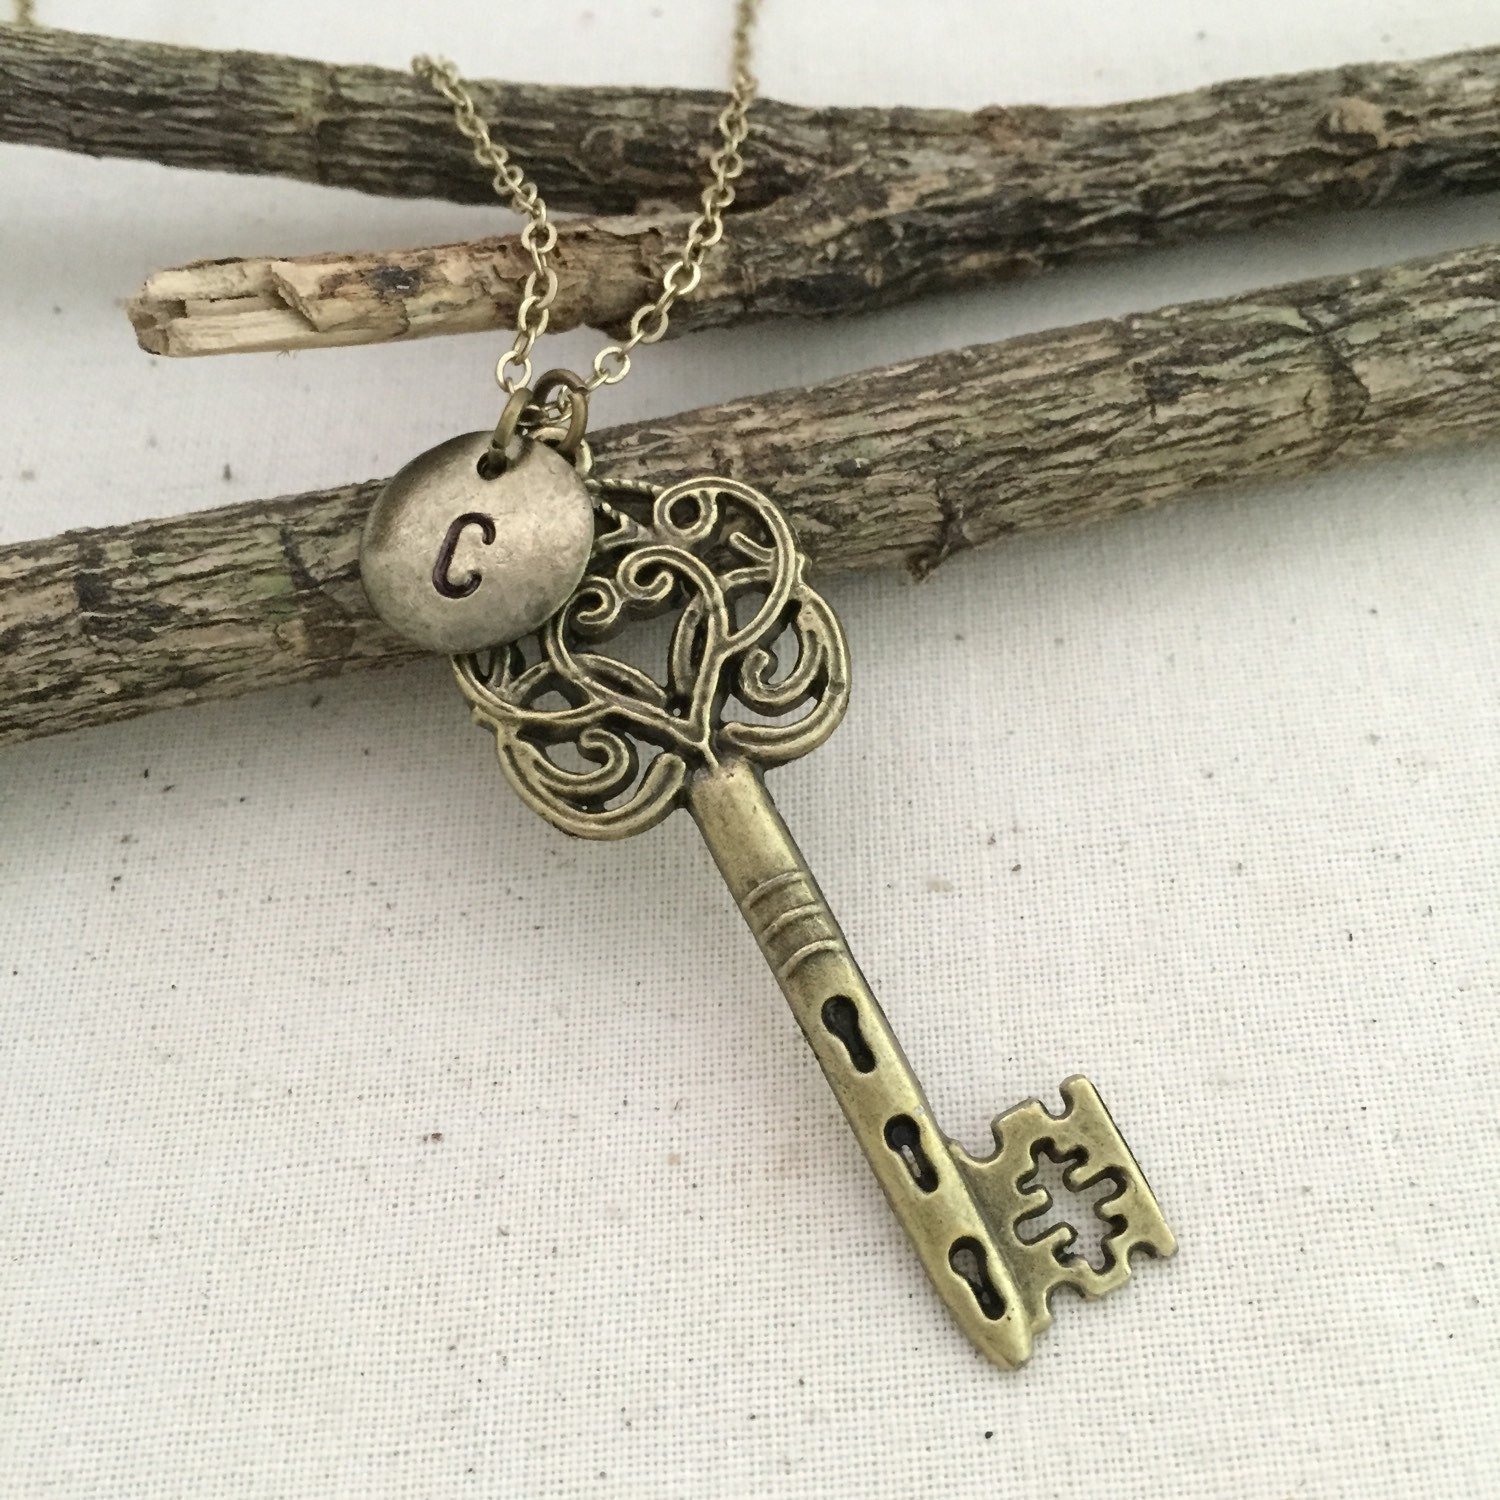 Ornate Style Victorian Key Necklace with Initial Charm